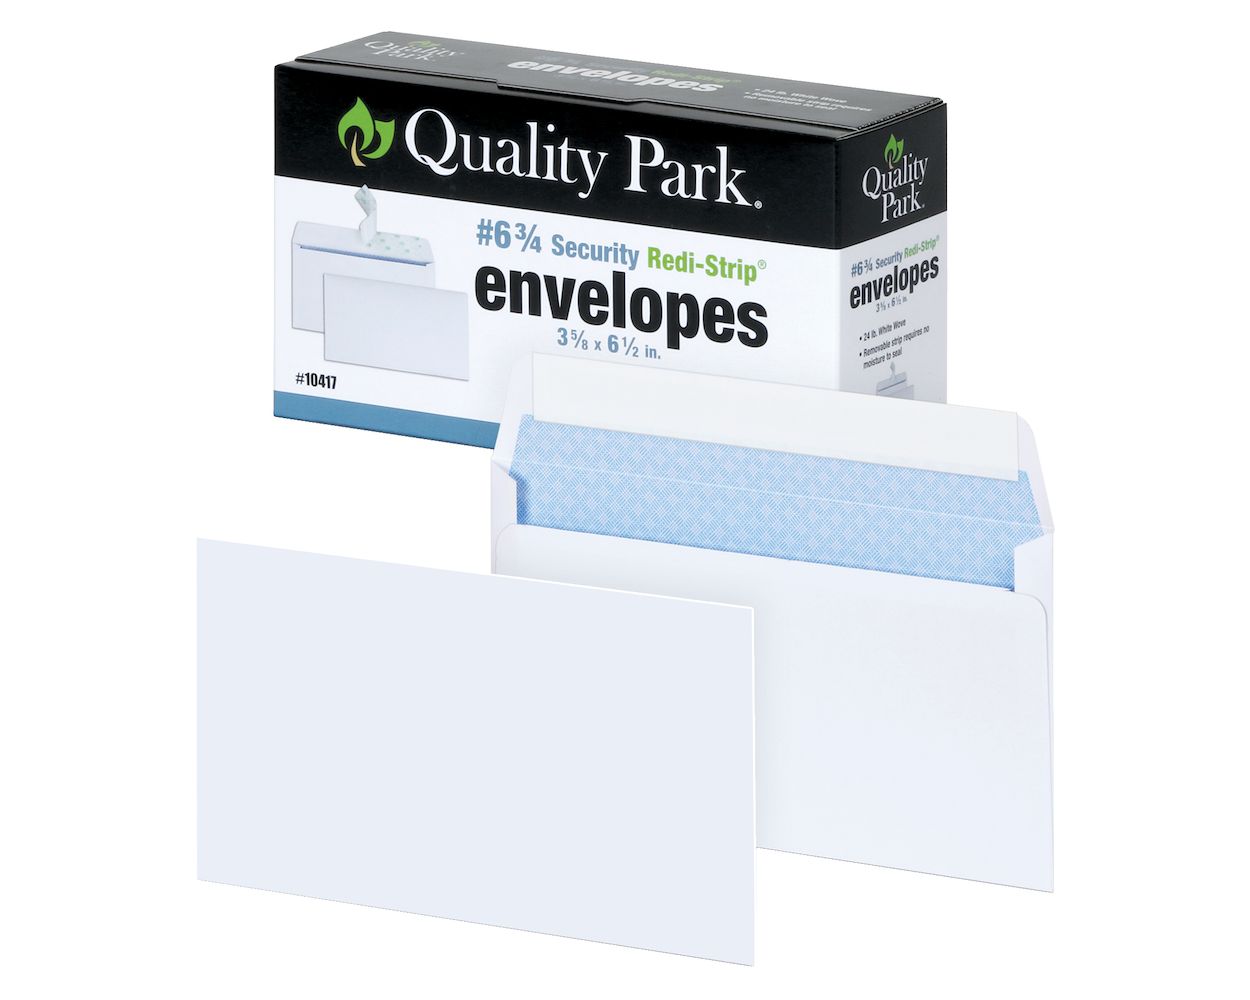 6 34 Security Tinted Envelopes with Redi Strip Self Seal Closure for Business Mailings 24 lb White Wove 3 58 x 6 12 100Box